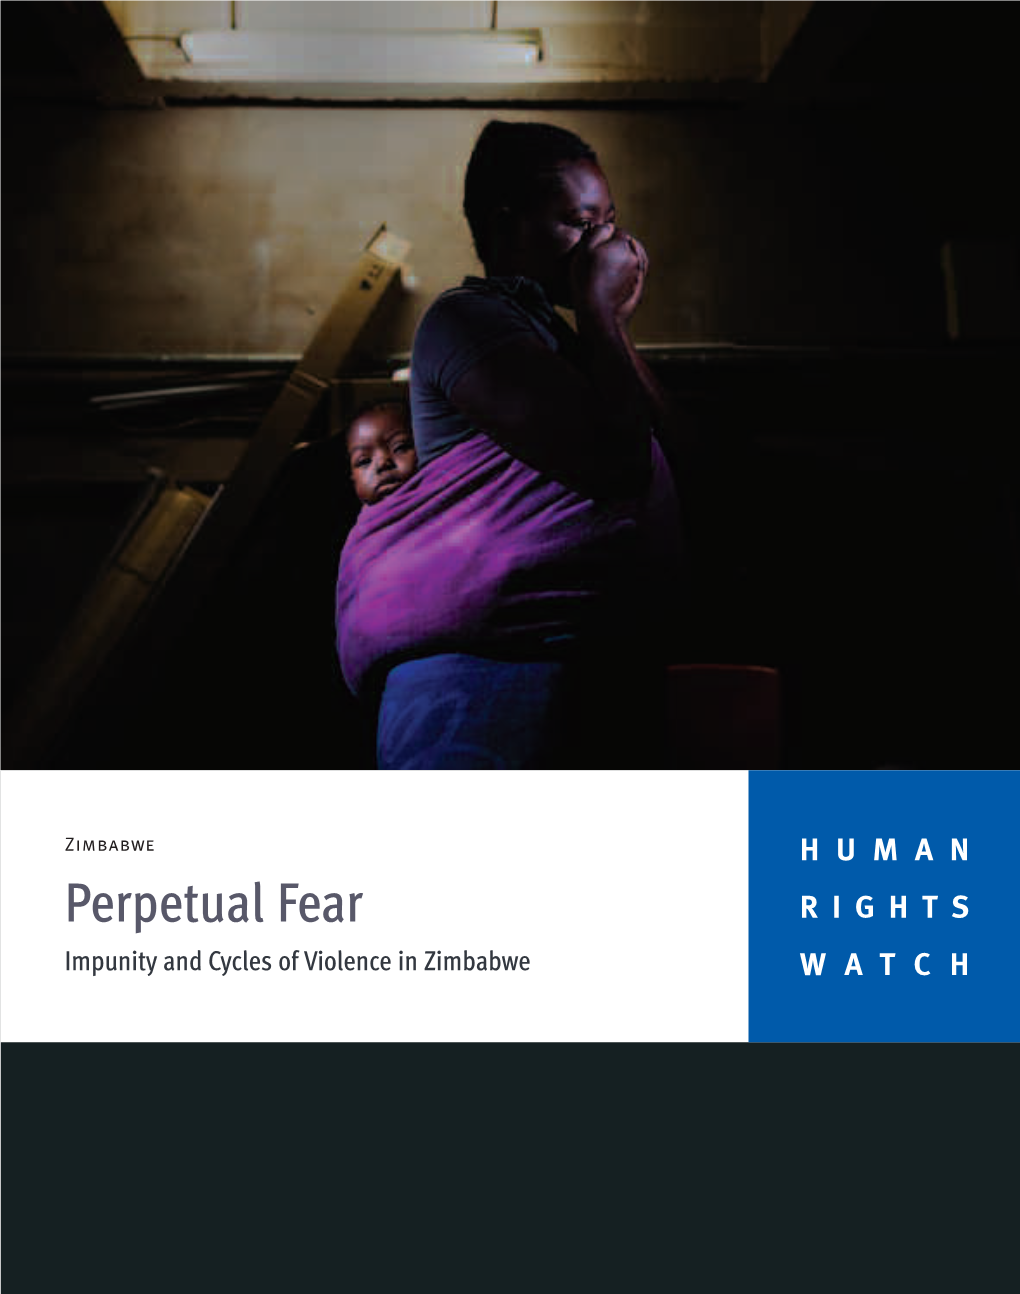 Perpetual Fear RIGHTS Impunity and Cycles of Violence in Zimbabwe WATCH